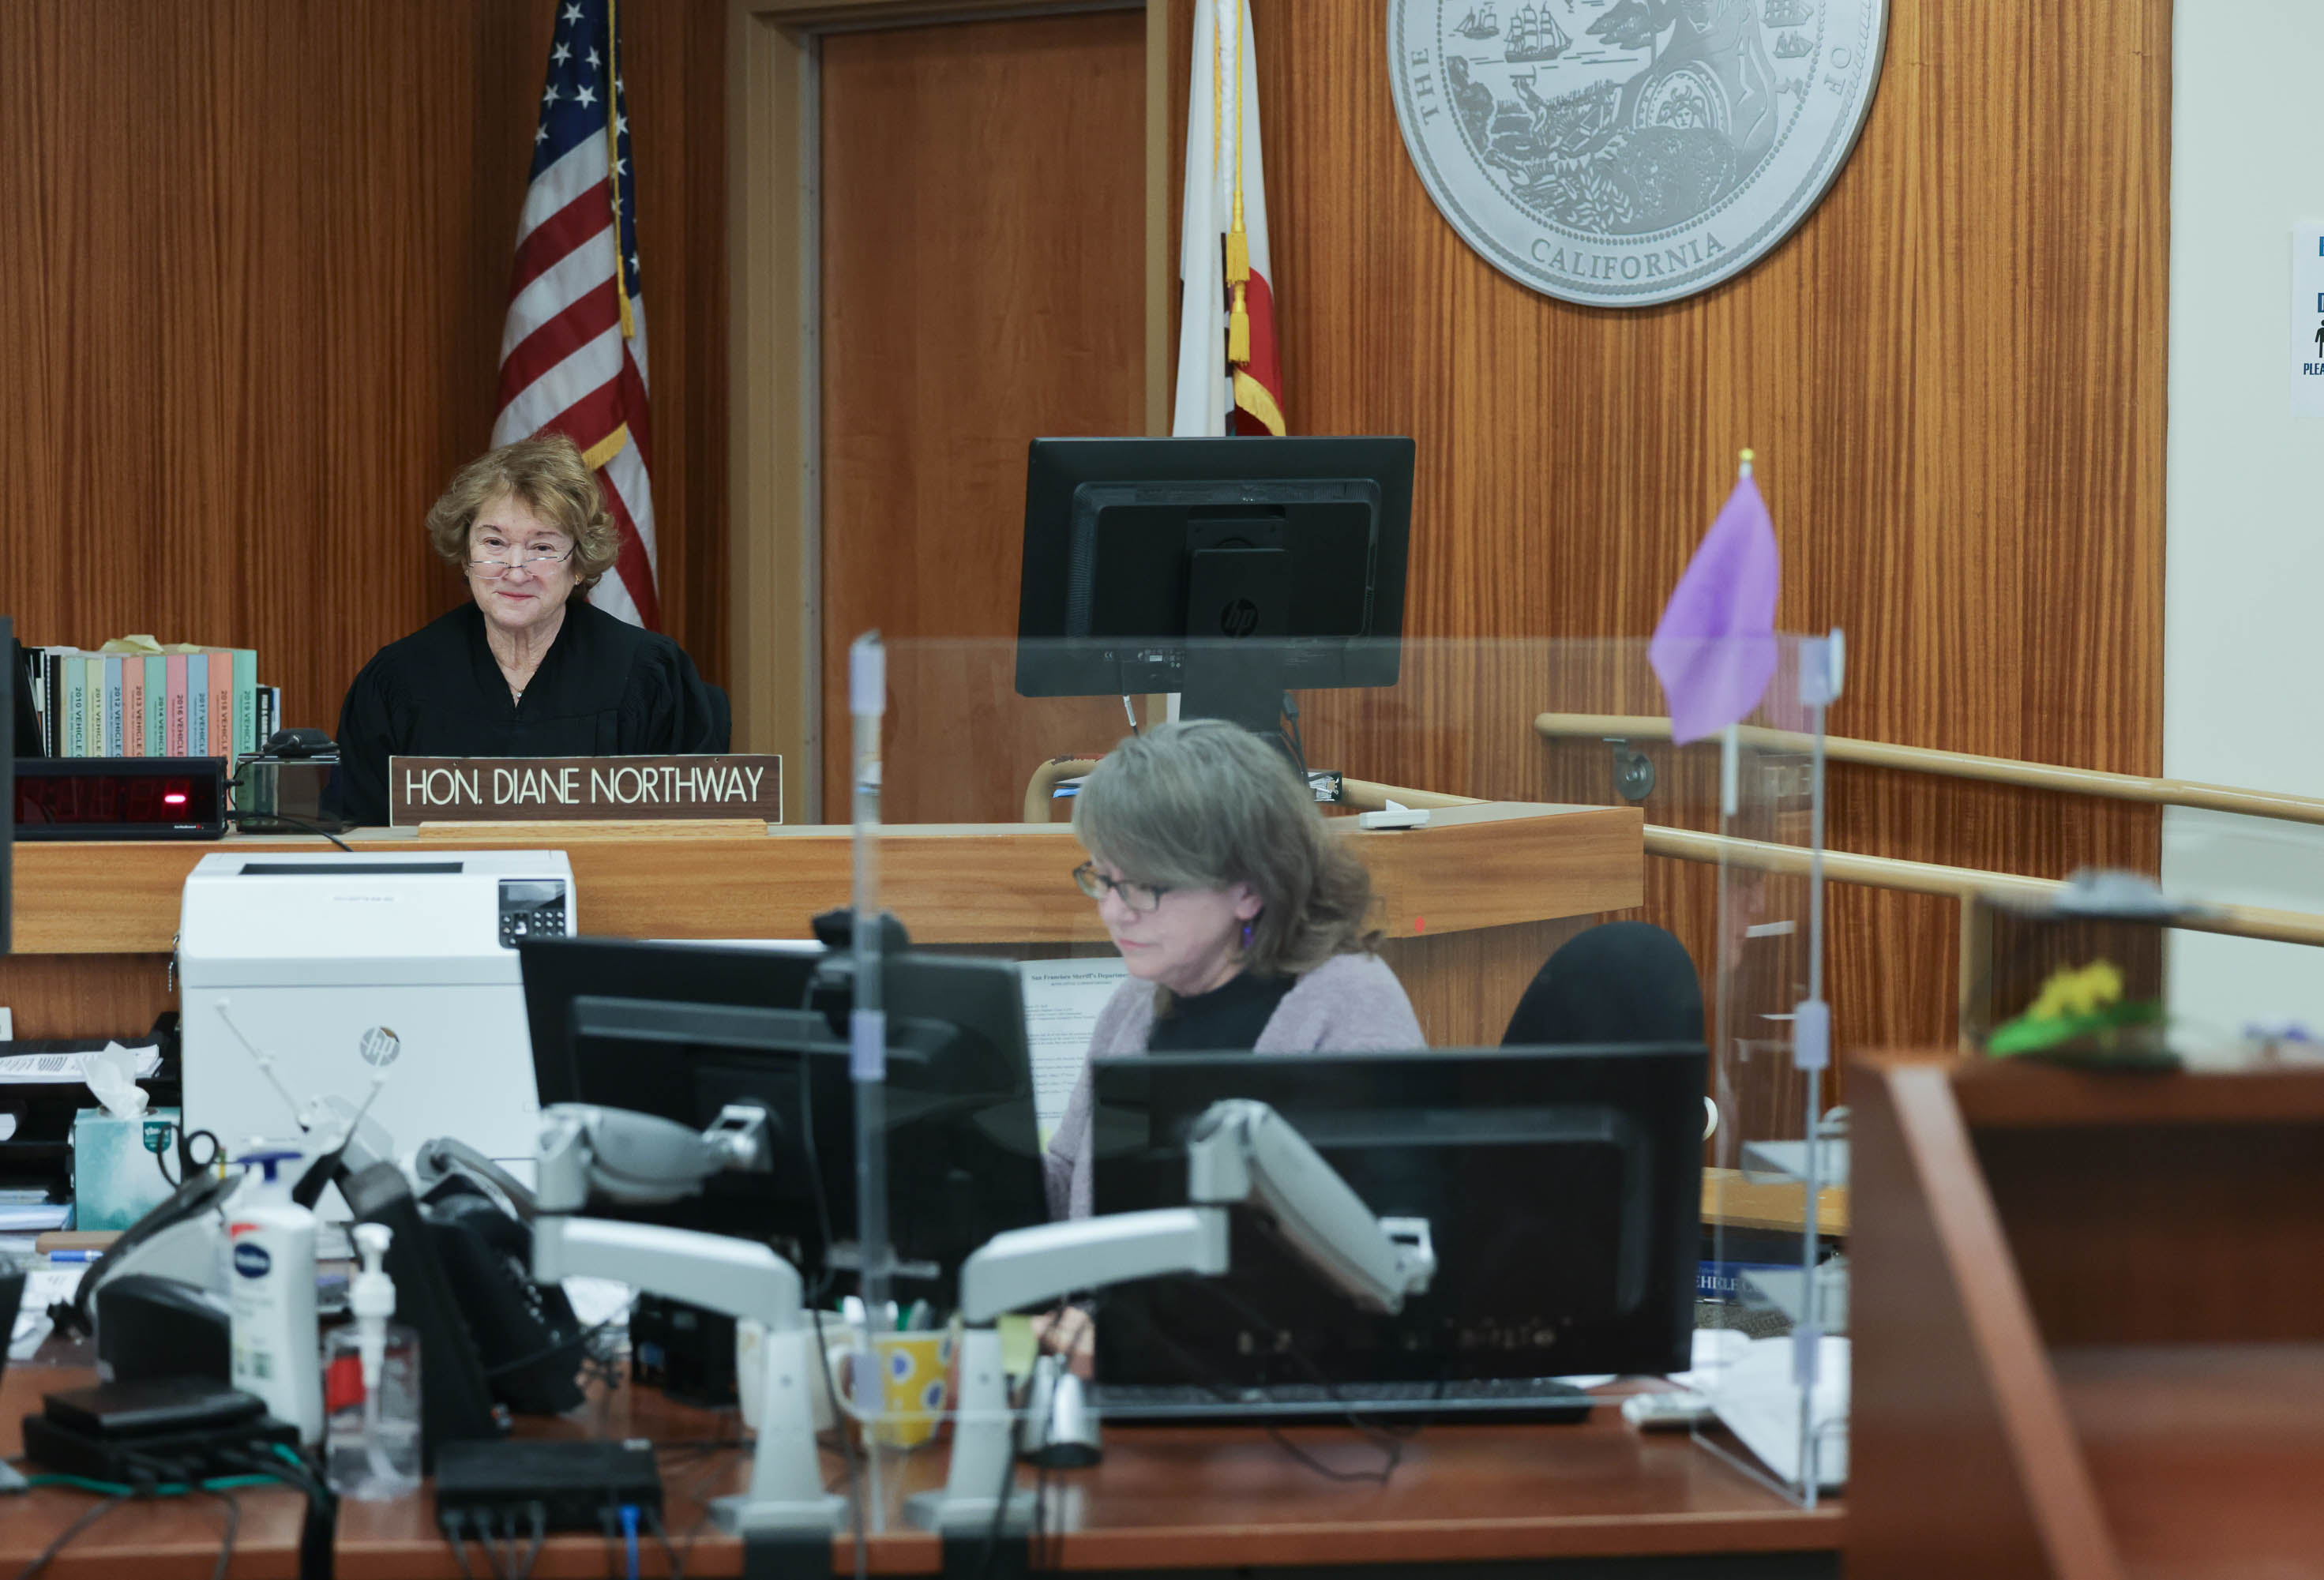 A judge sits on a dais in the background and a clerk sits at a computer in the foreground.